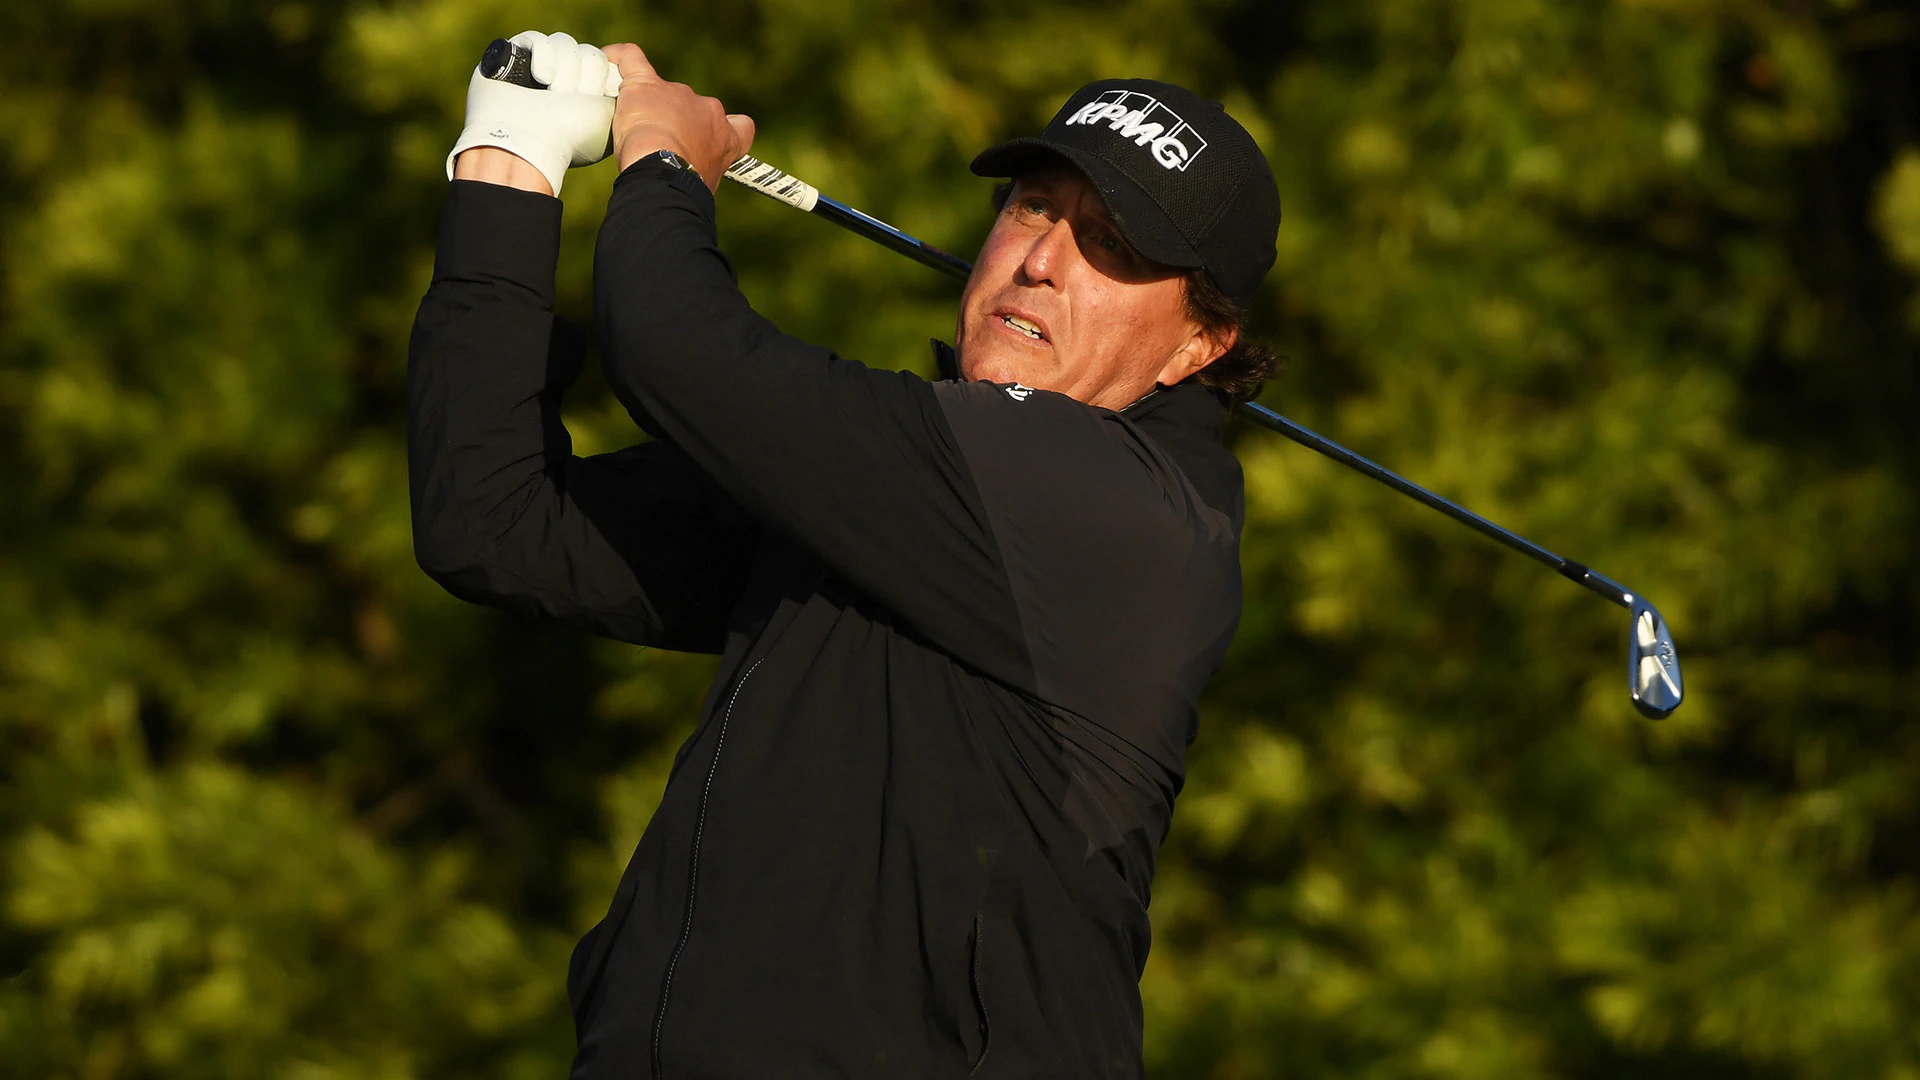 Mickelson: 'Really no carryover' from AT&T to U.S. Open